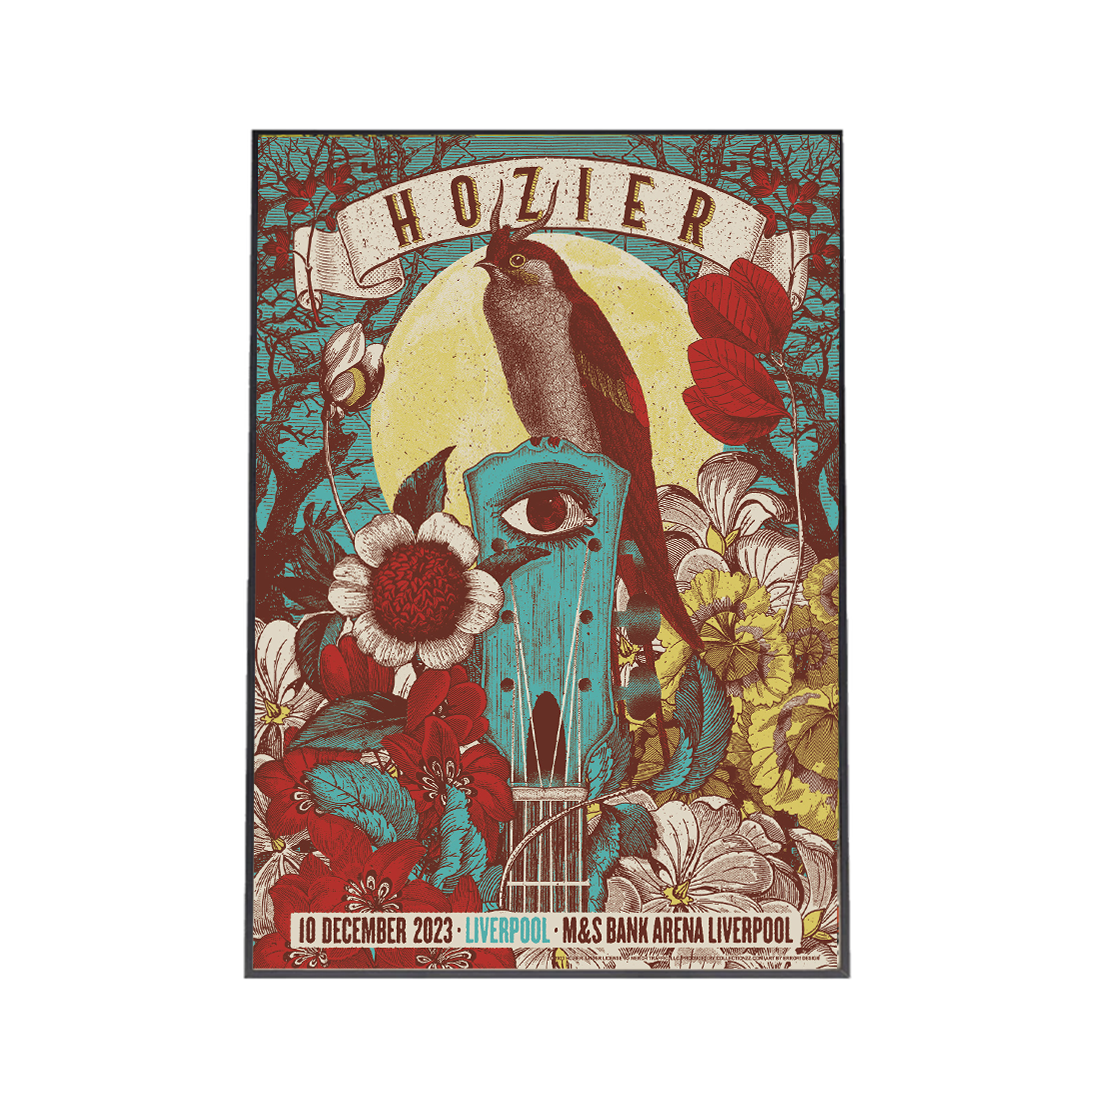 Hozier - Liverpool Event Poster